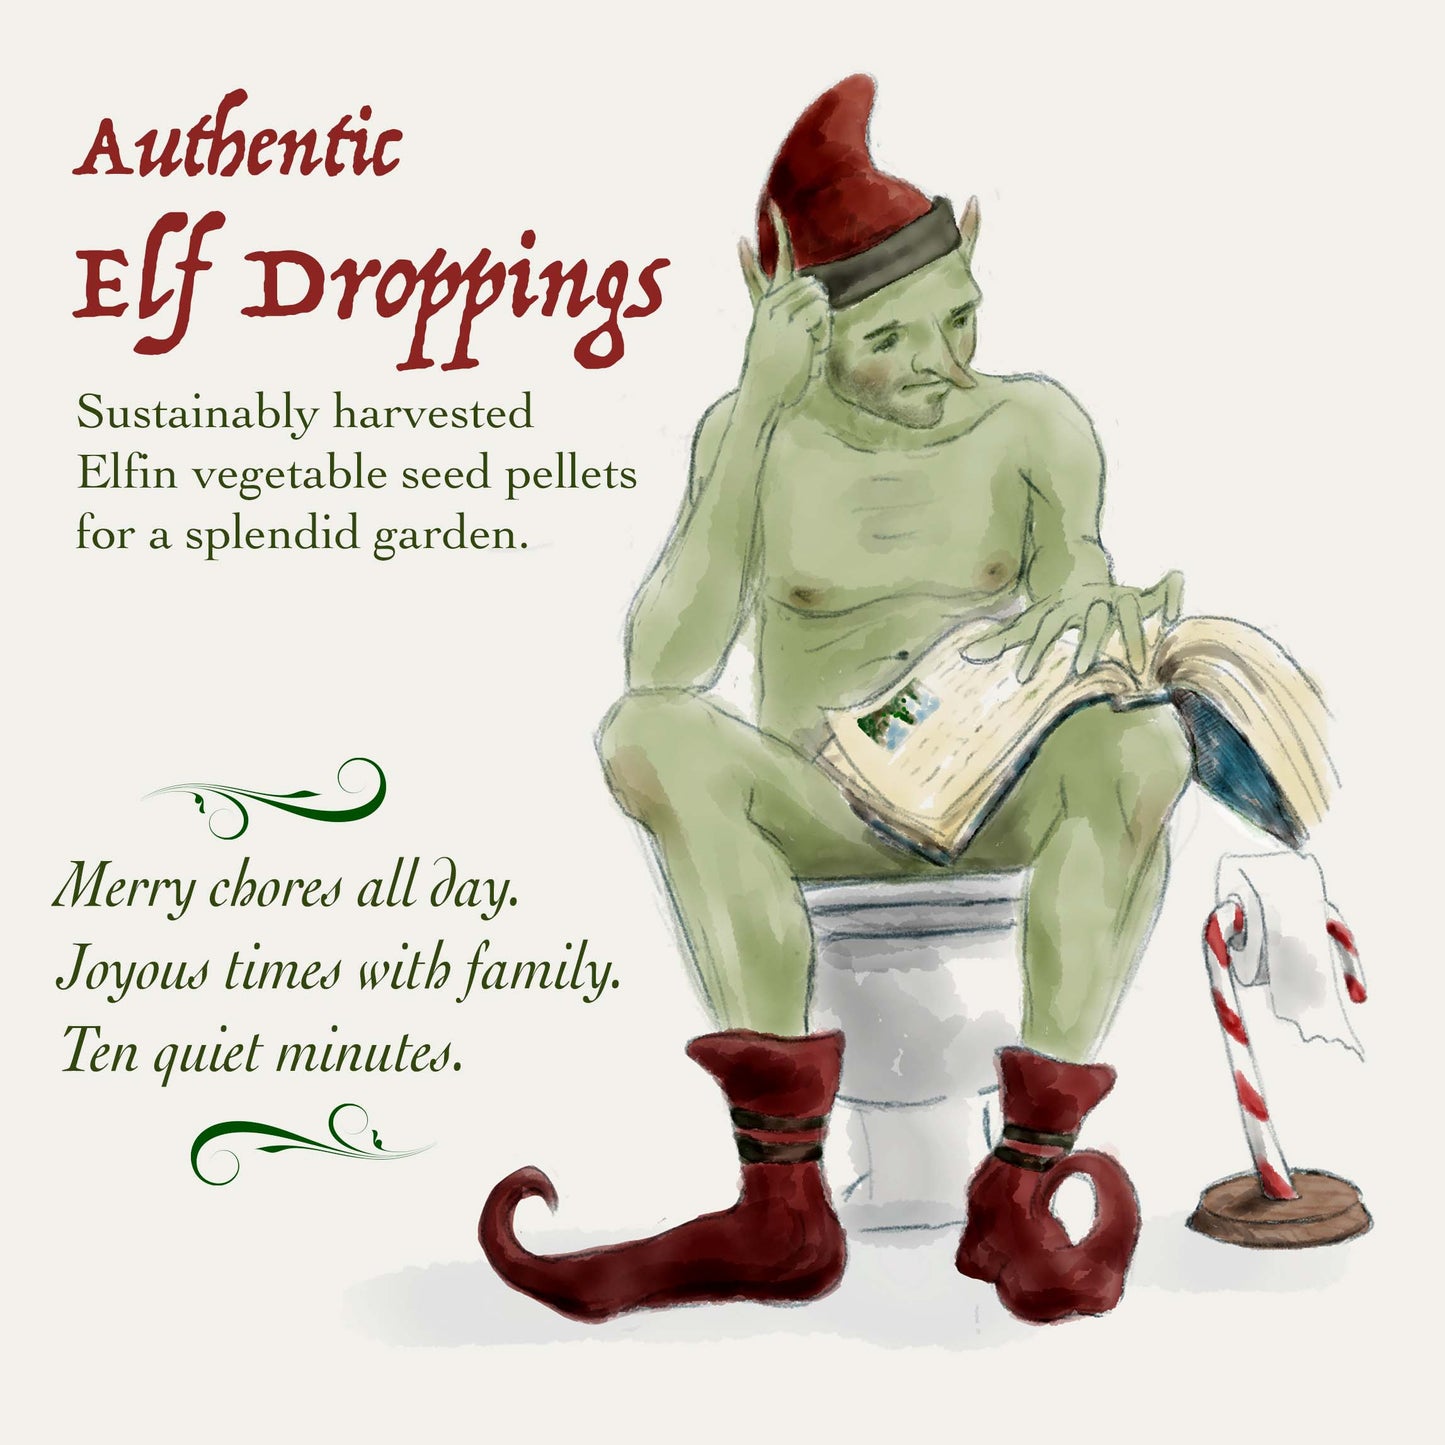 Authentic Elf Droppings (mixed veggie seed pellets)